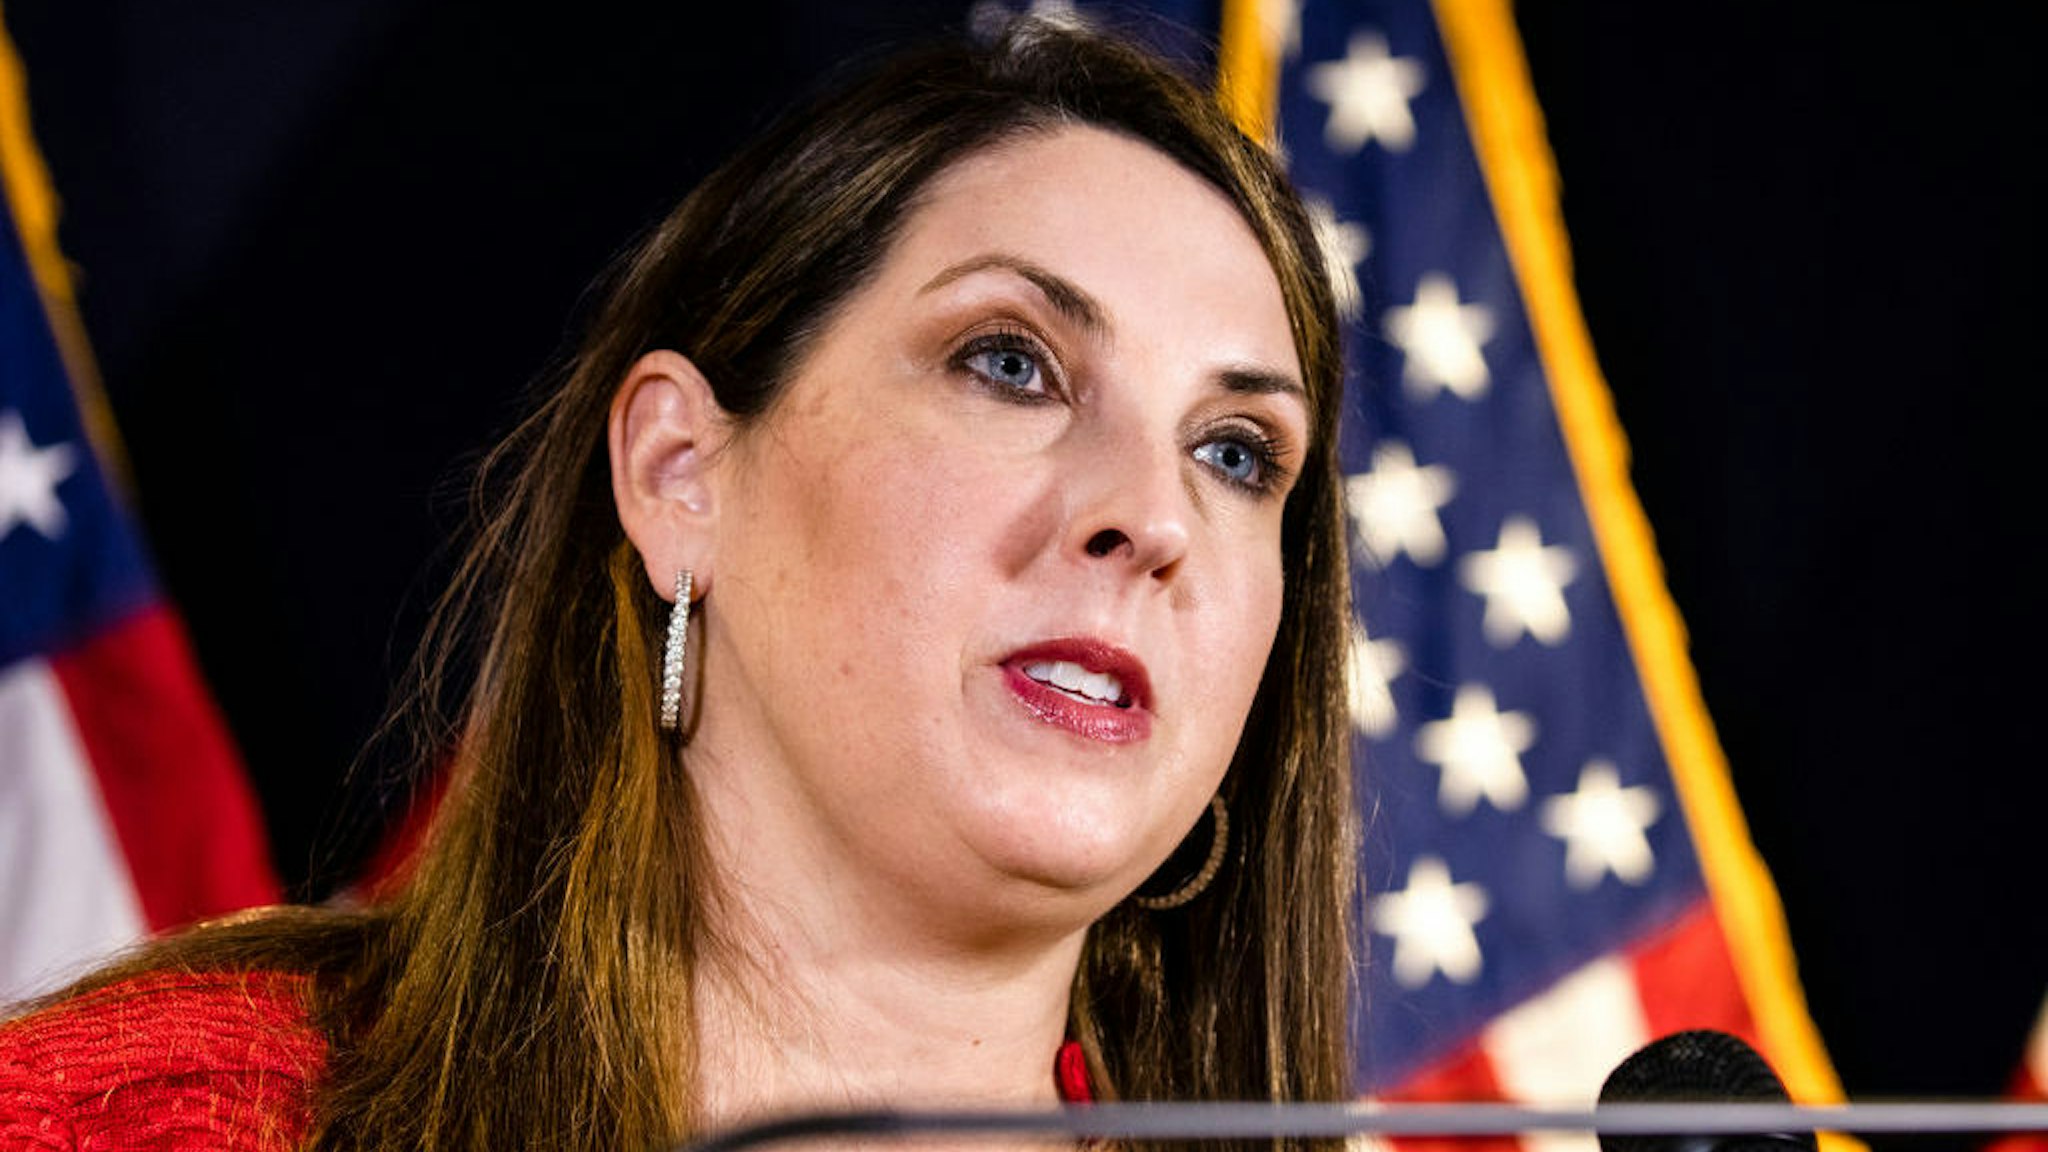 WASHINGTON, DC - NOVEMBER 09: RNC Chairwoman Ronna McDaniel speaks during a press conference alongside White House Press Secretary Kayleigh McEnany and Trump Campaign General Counsel Matt Morgan at the Republican National Committee headquarters on November 9, 2020 in Washington, DC. (Photo by Samuel Corum/Getty Images) *** Local Caption *** Ronna McDaniel